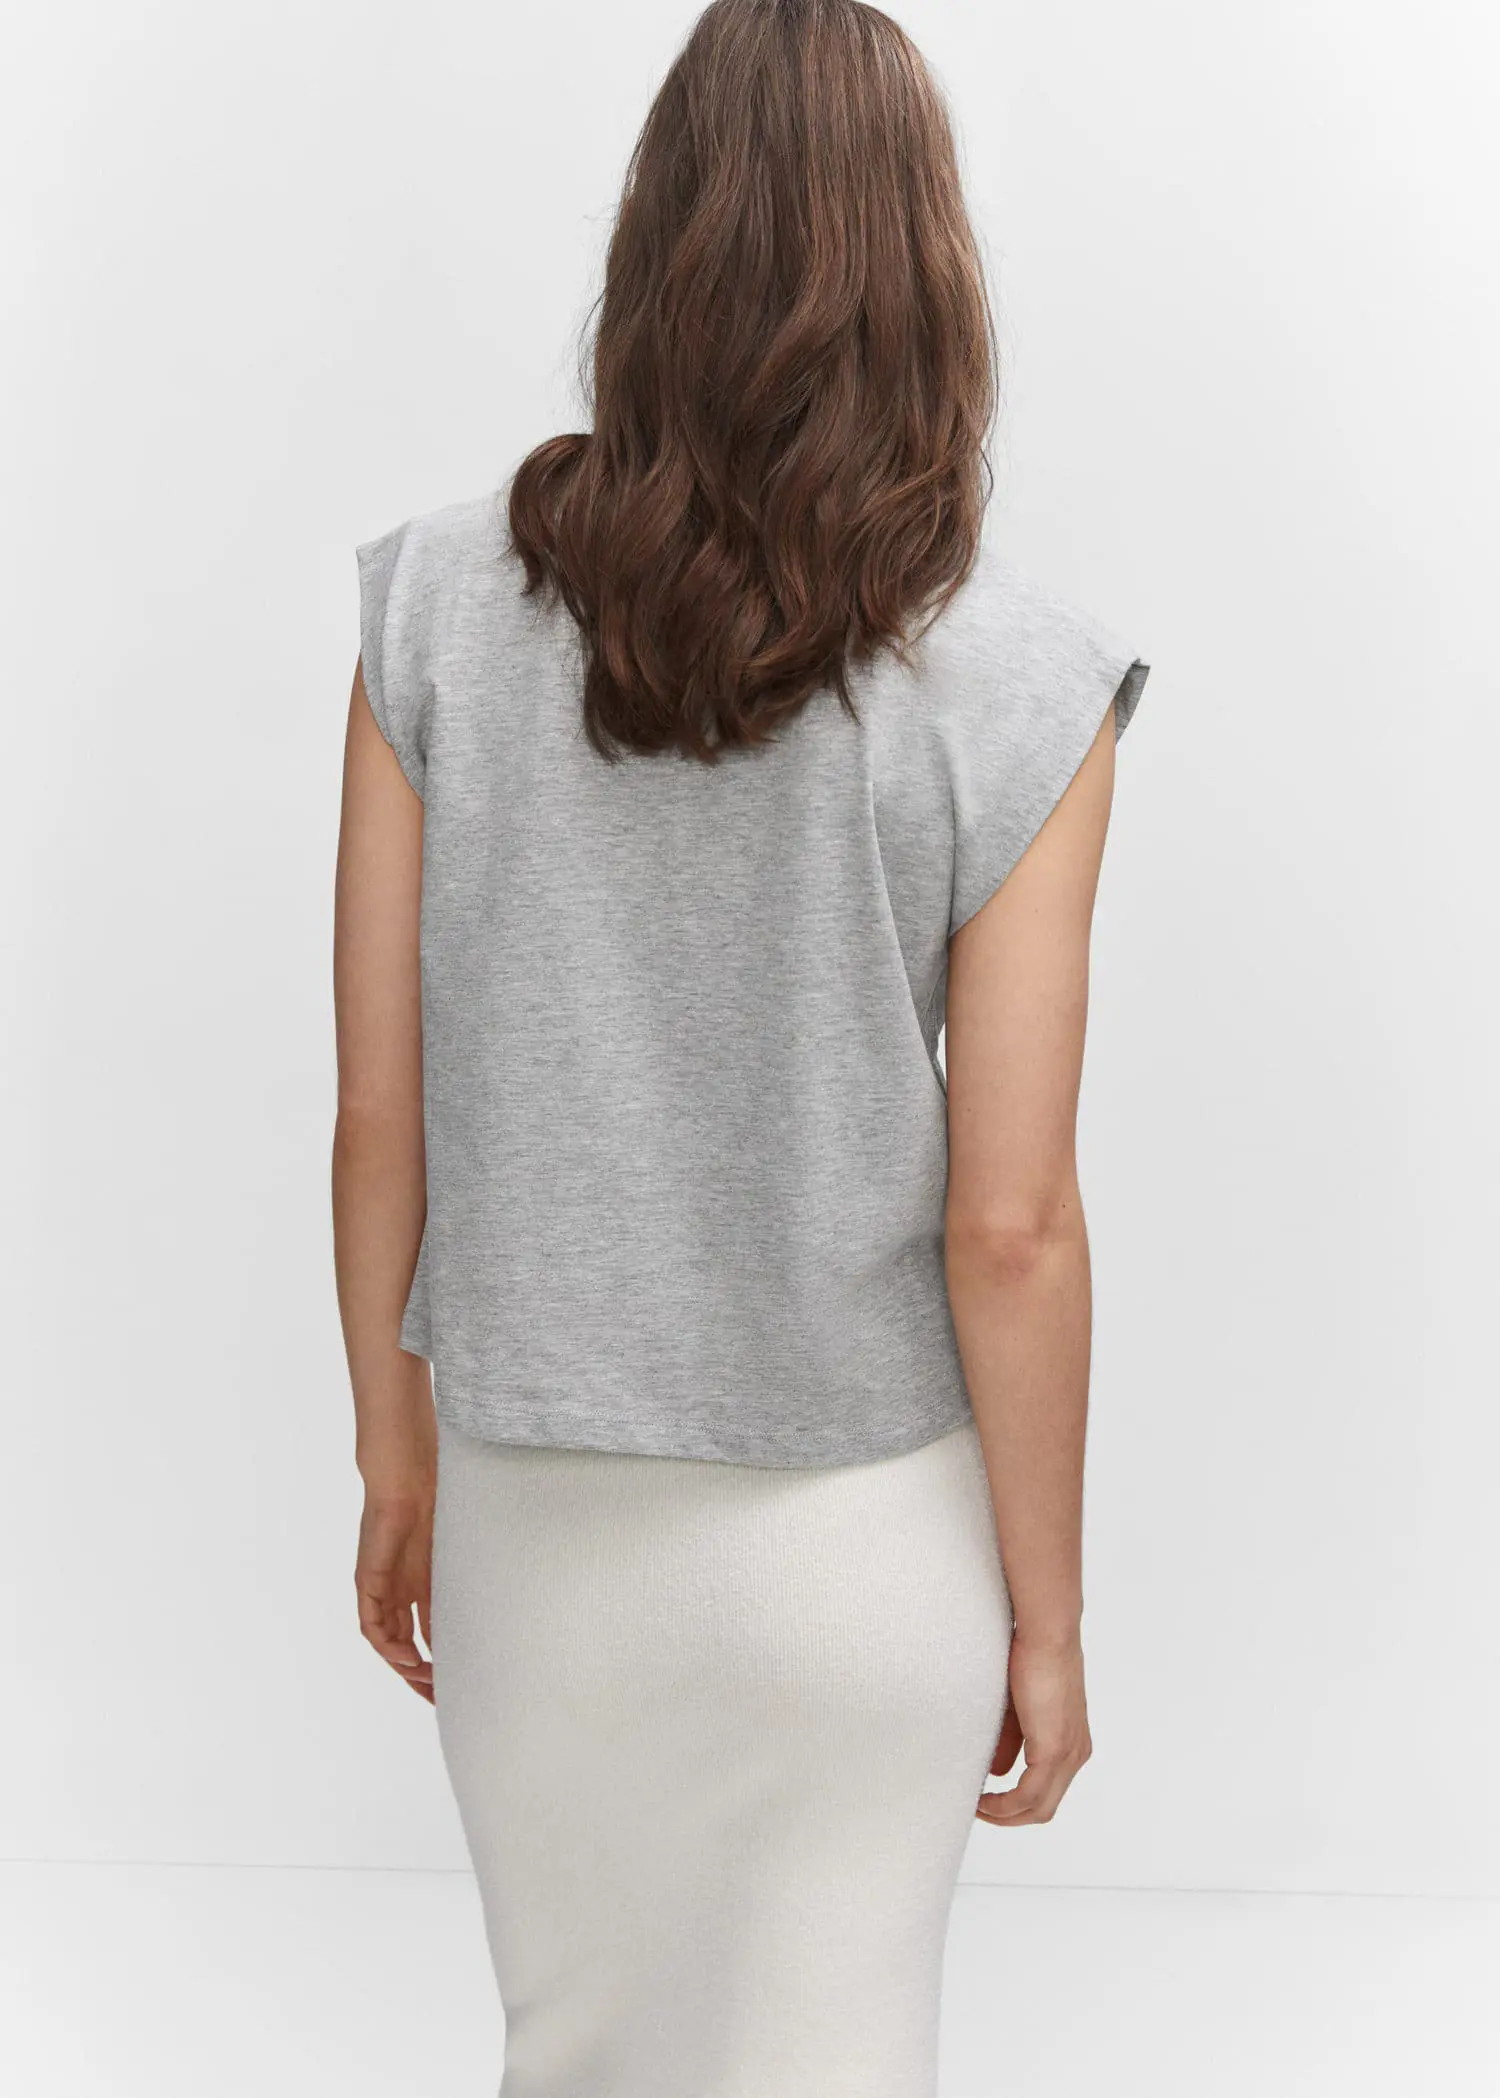 Mango Message cotton T-shirt. a woman wearing a white skirt and a gray top. 